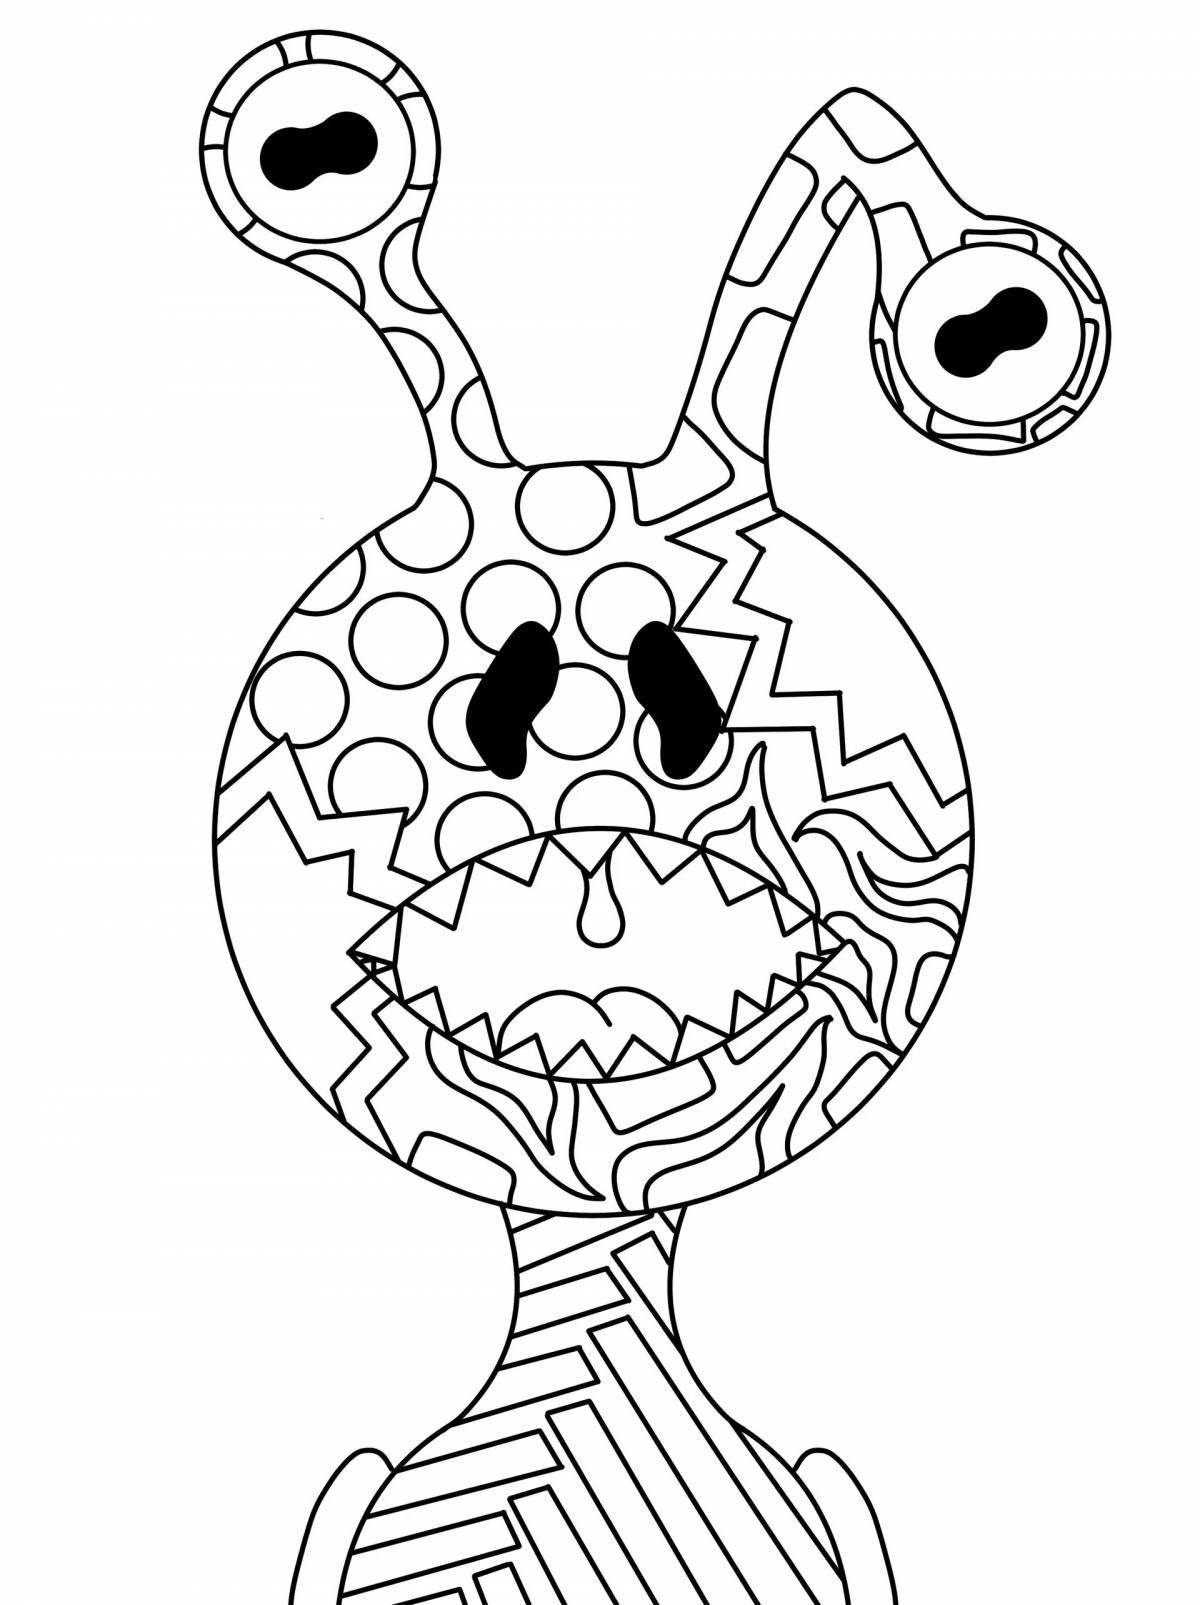 Sparkling musical monsters coloring page